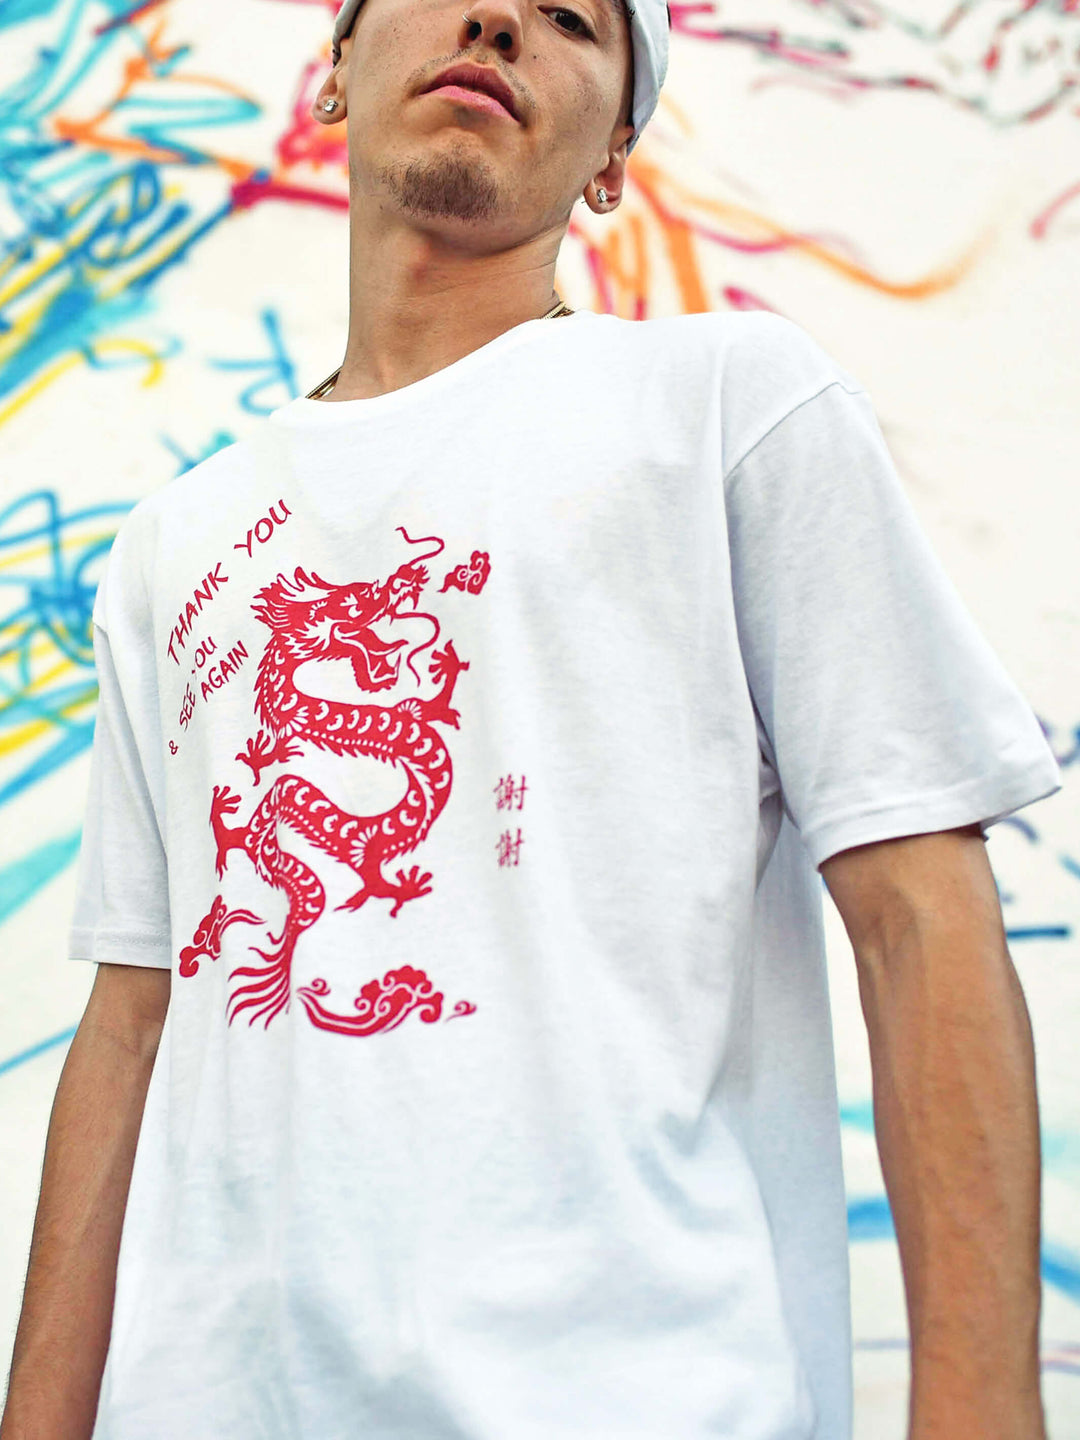 White graphic tee with a Chinese takeout design by Los Angeles brand Popkiller.